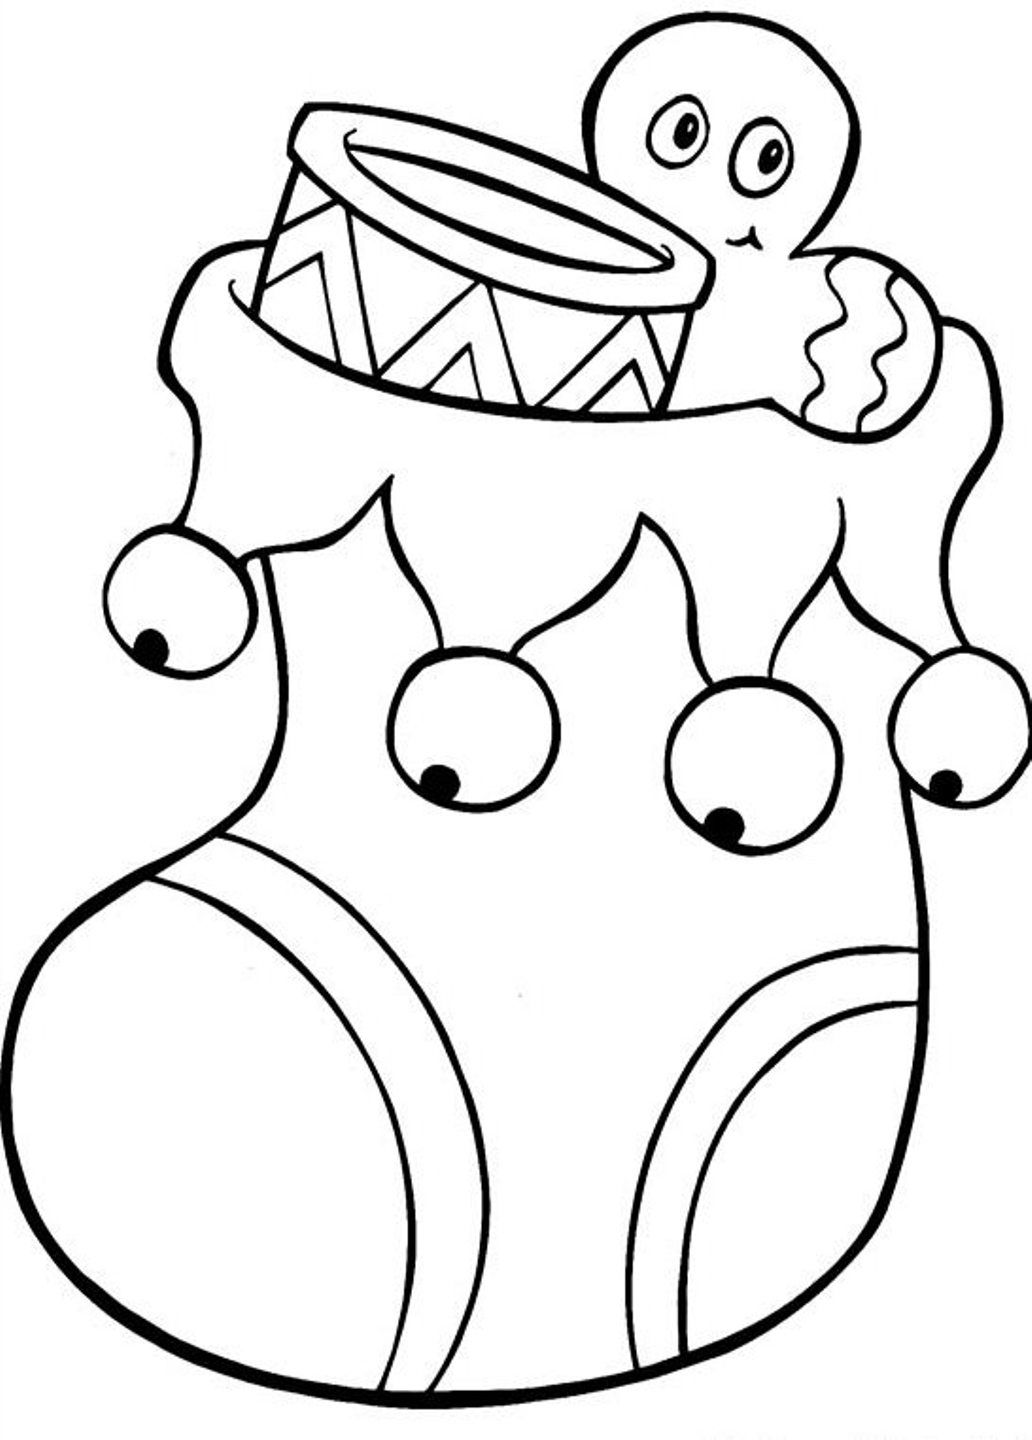 Christmas Stocking Coloring Sheet : Free Coloring Pages Christmas